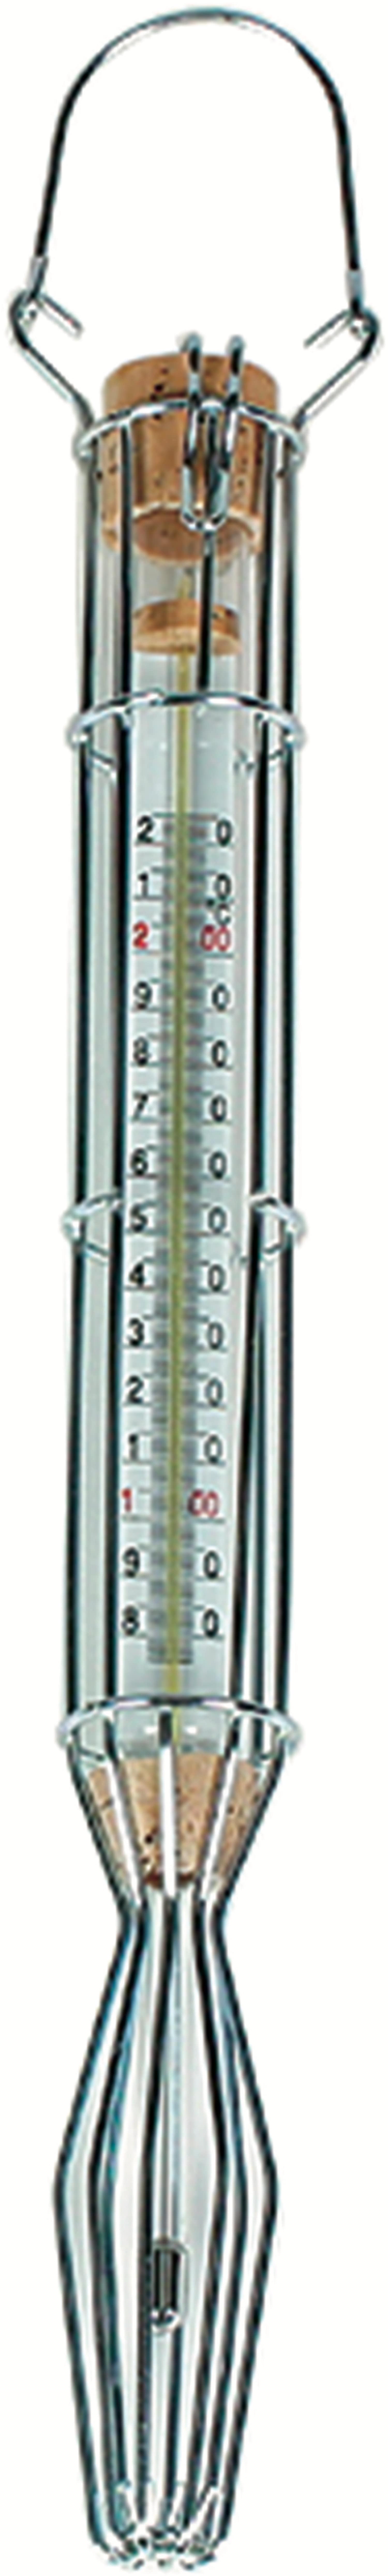 Thermometers 160001